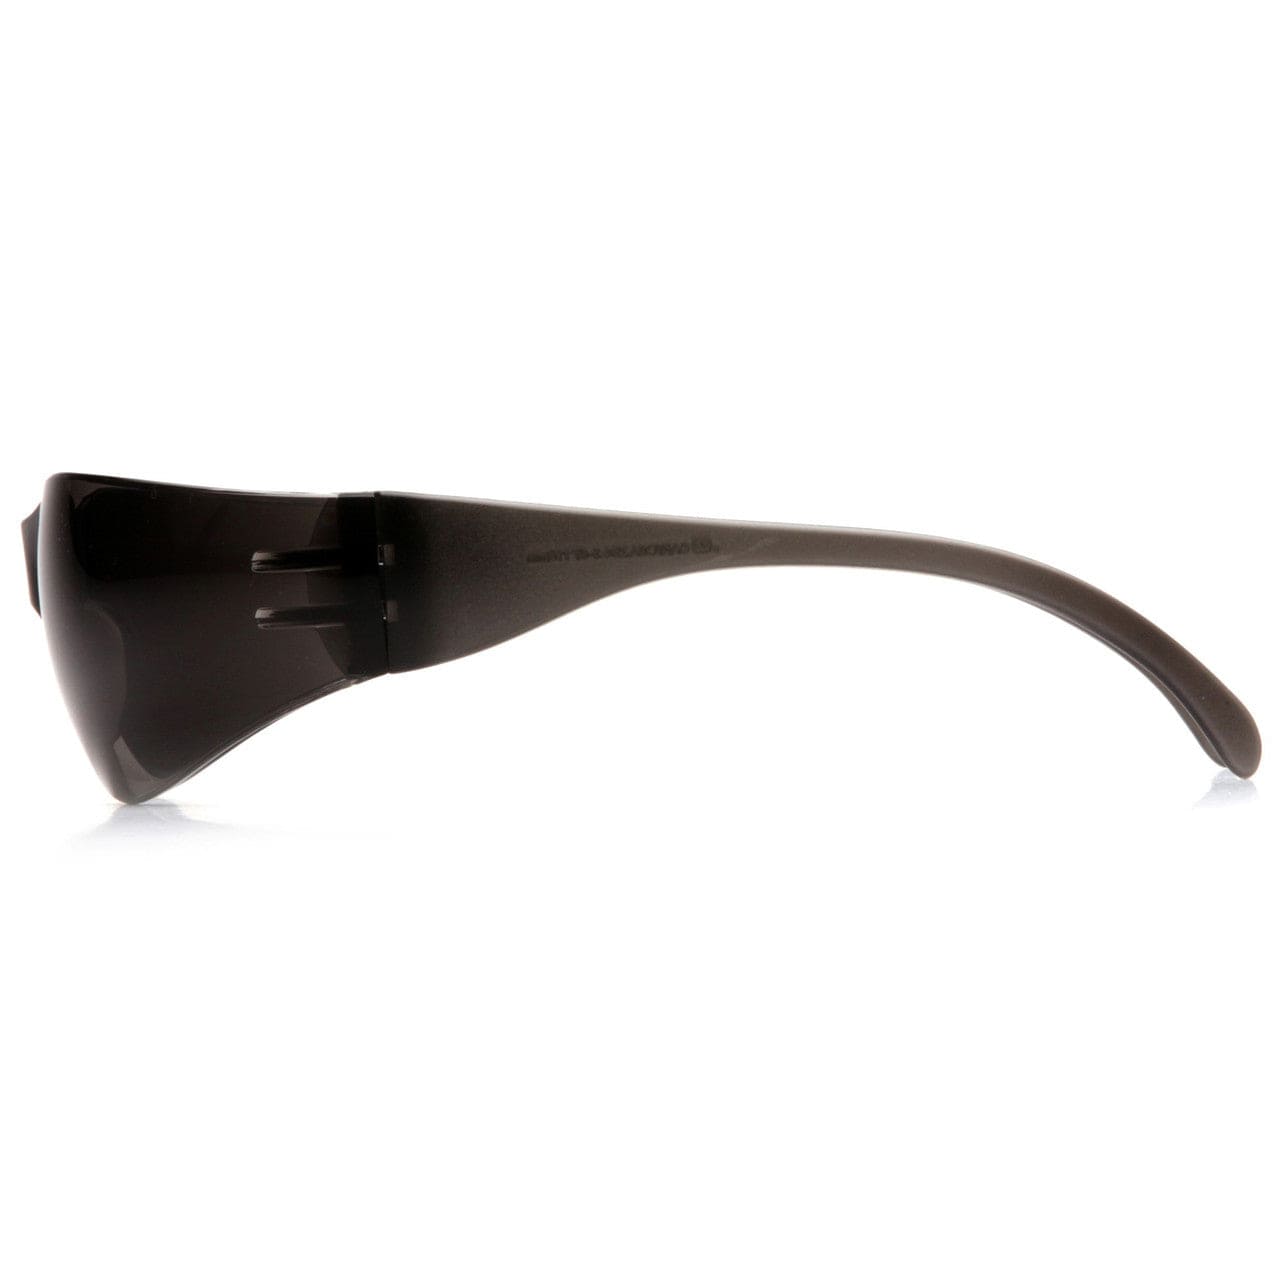 Pyramex Intruder Safety Glasses with Gray Lens S4120S Side View